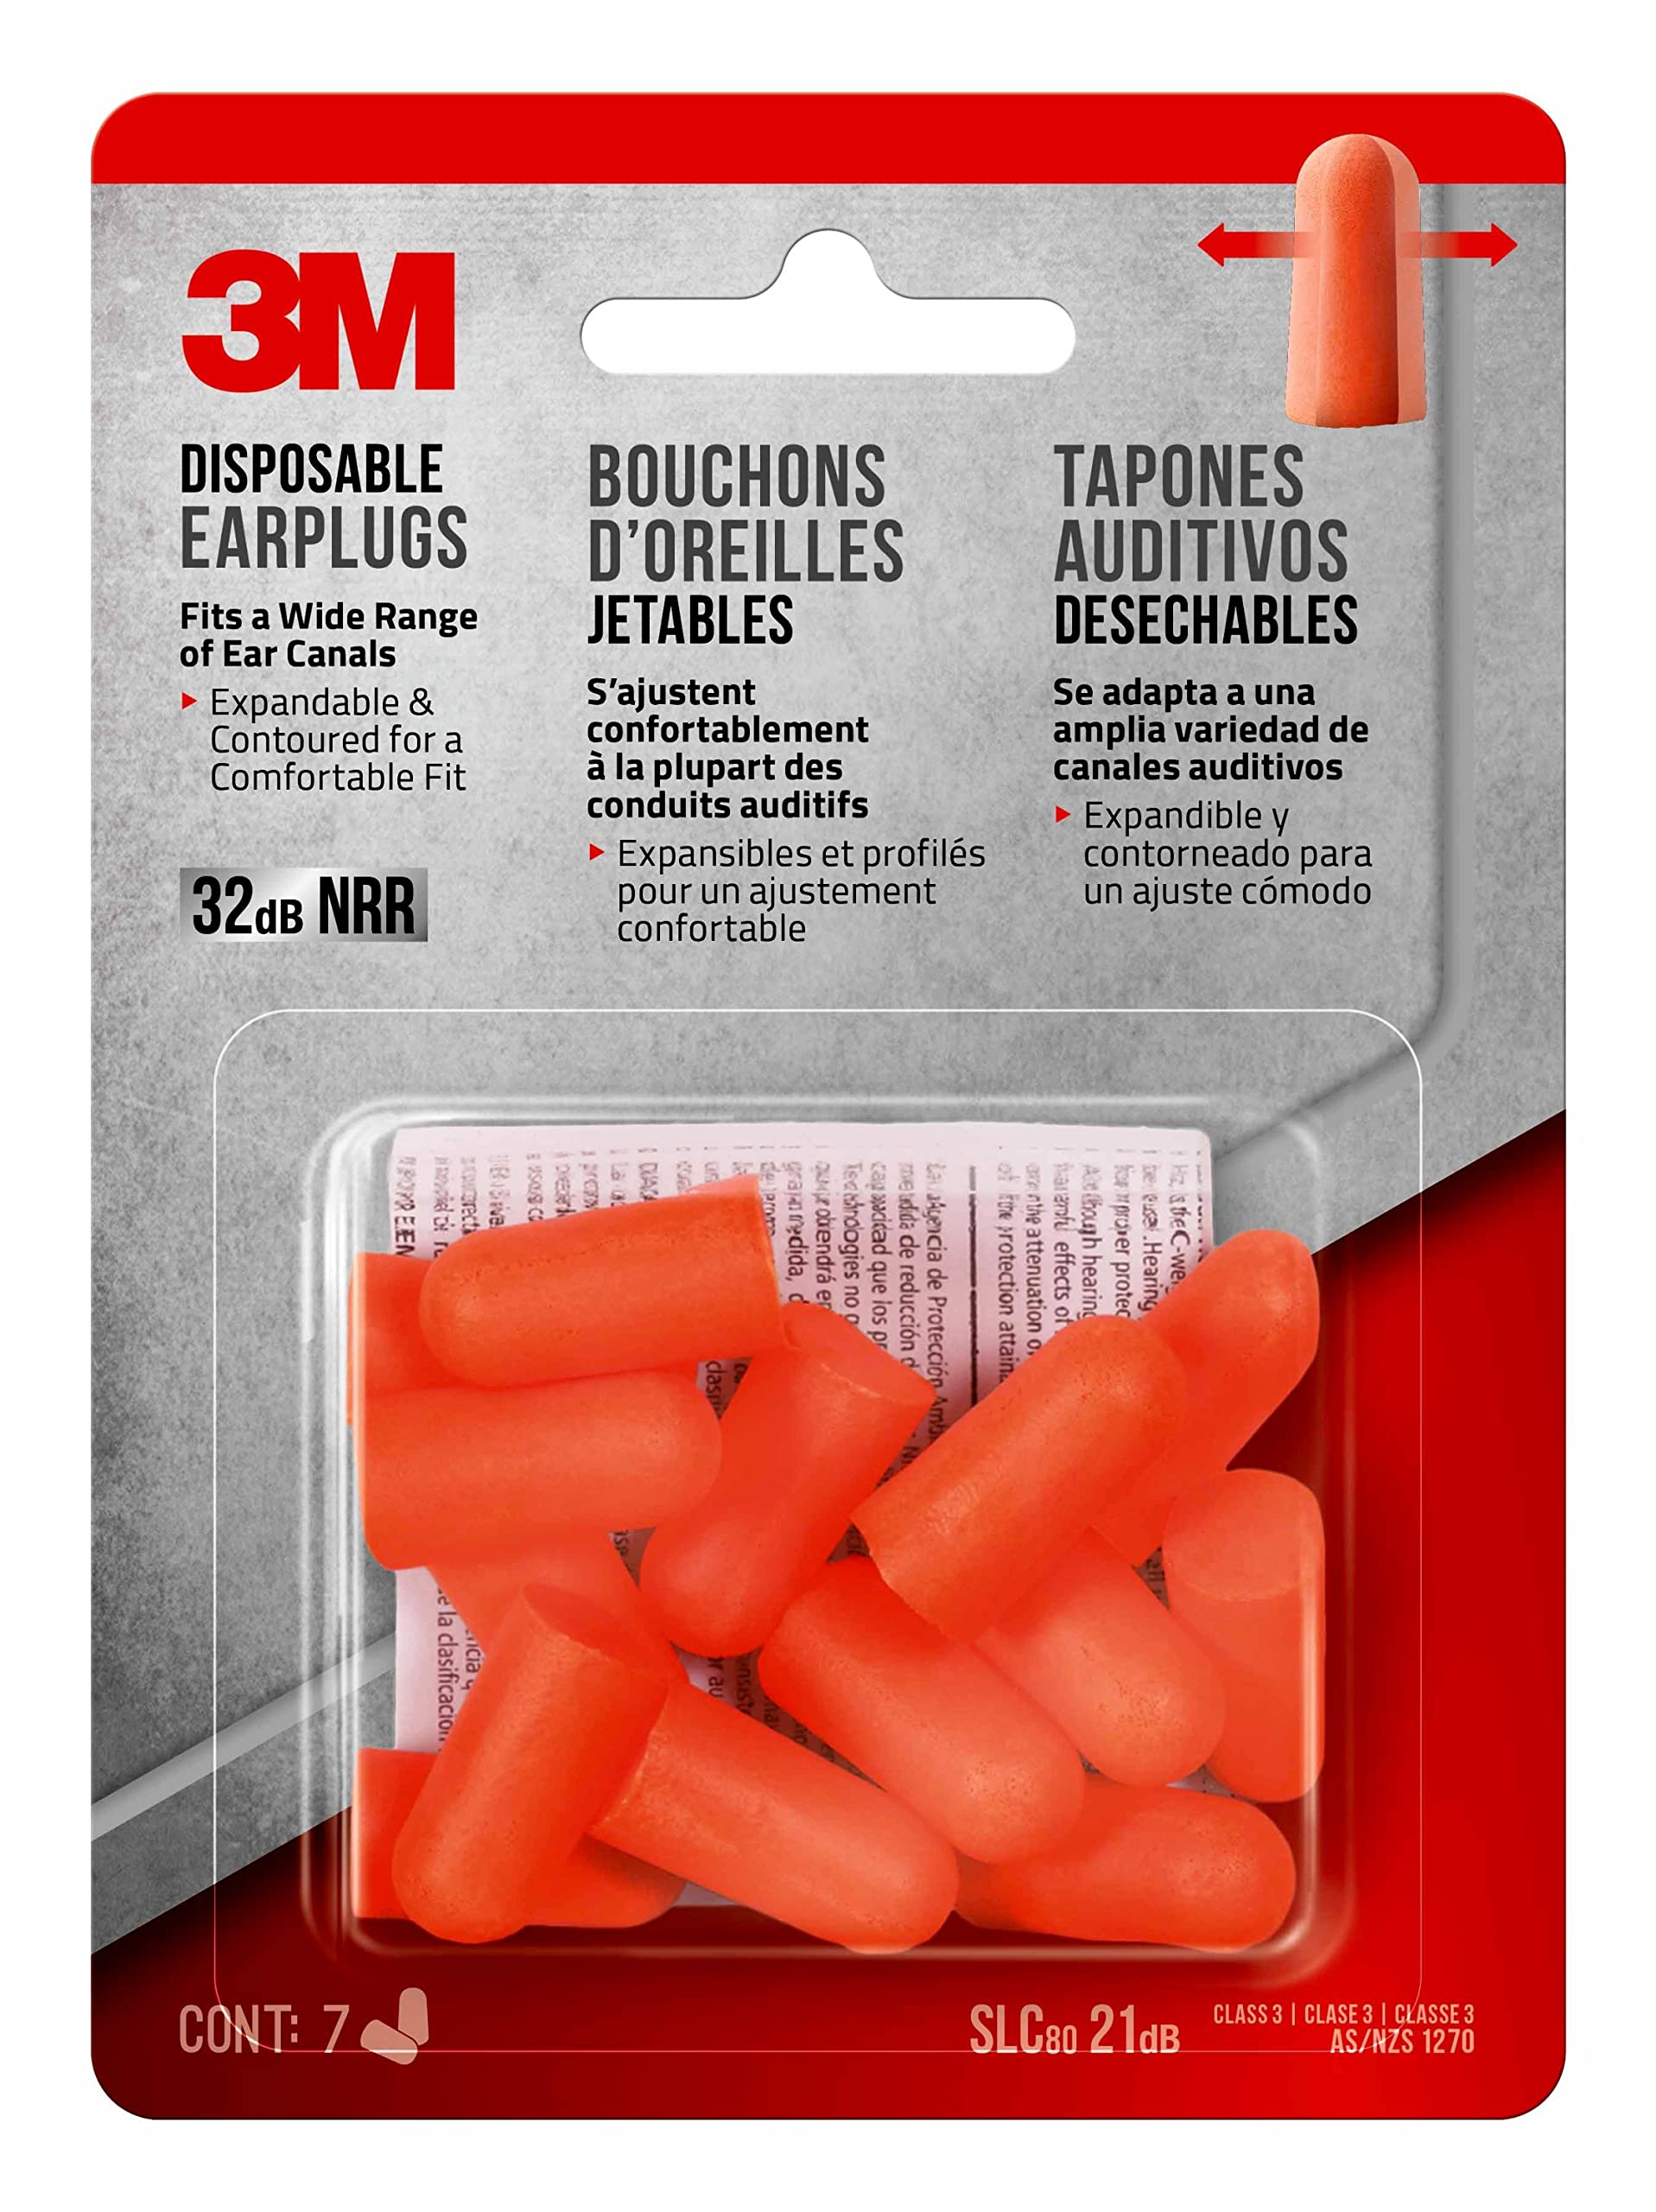 3M Disposable Earplugs, Lightweight and Pliable Ear Plugs, NRR 32dB, 7-Pair